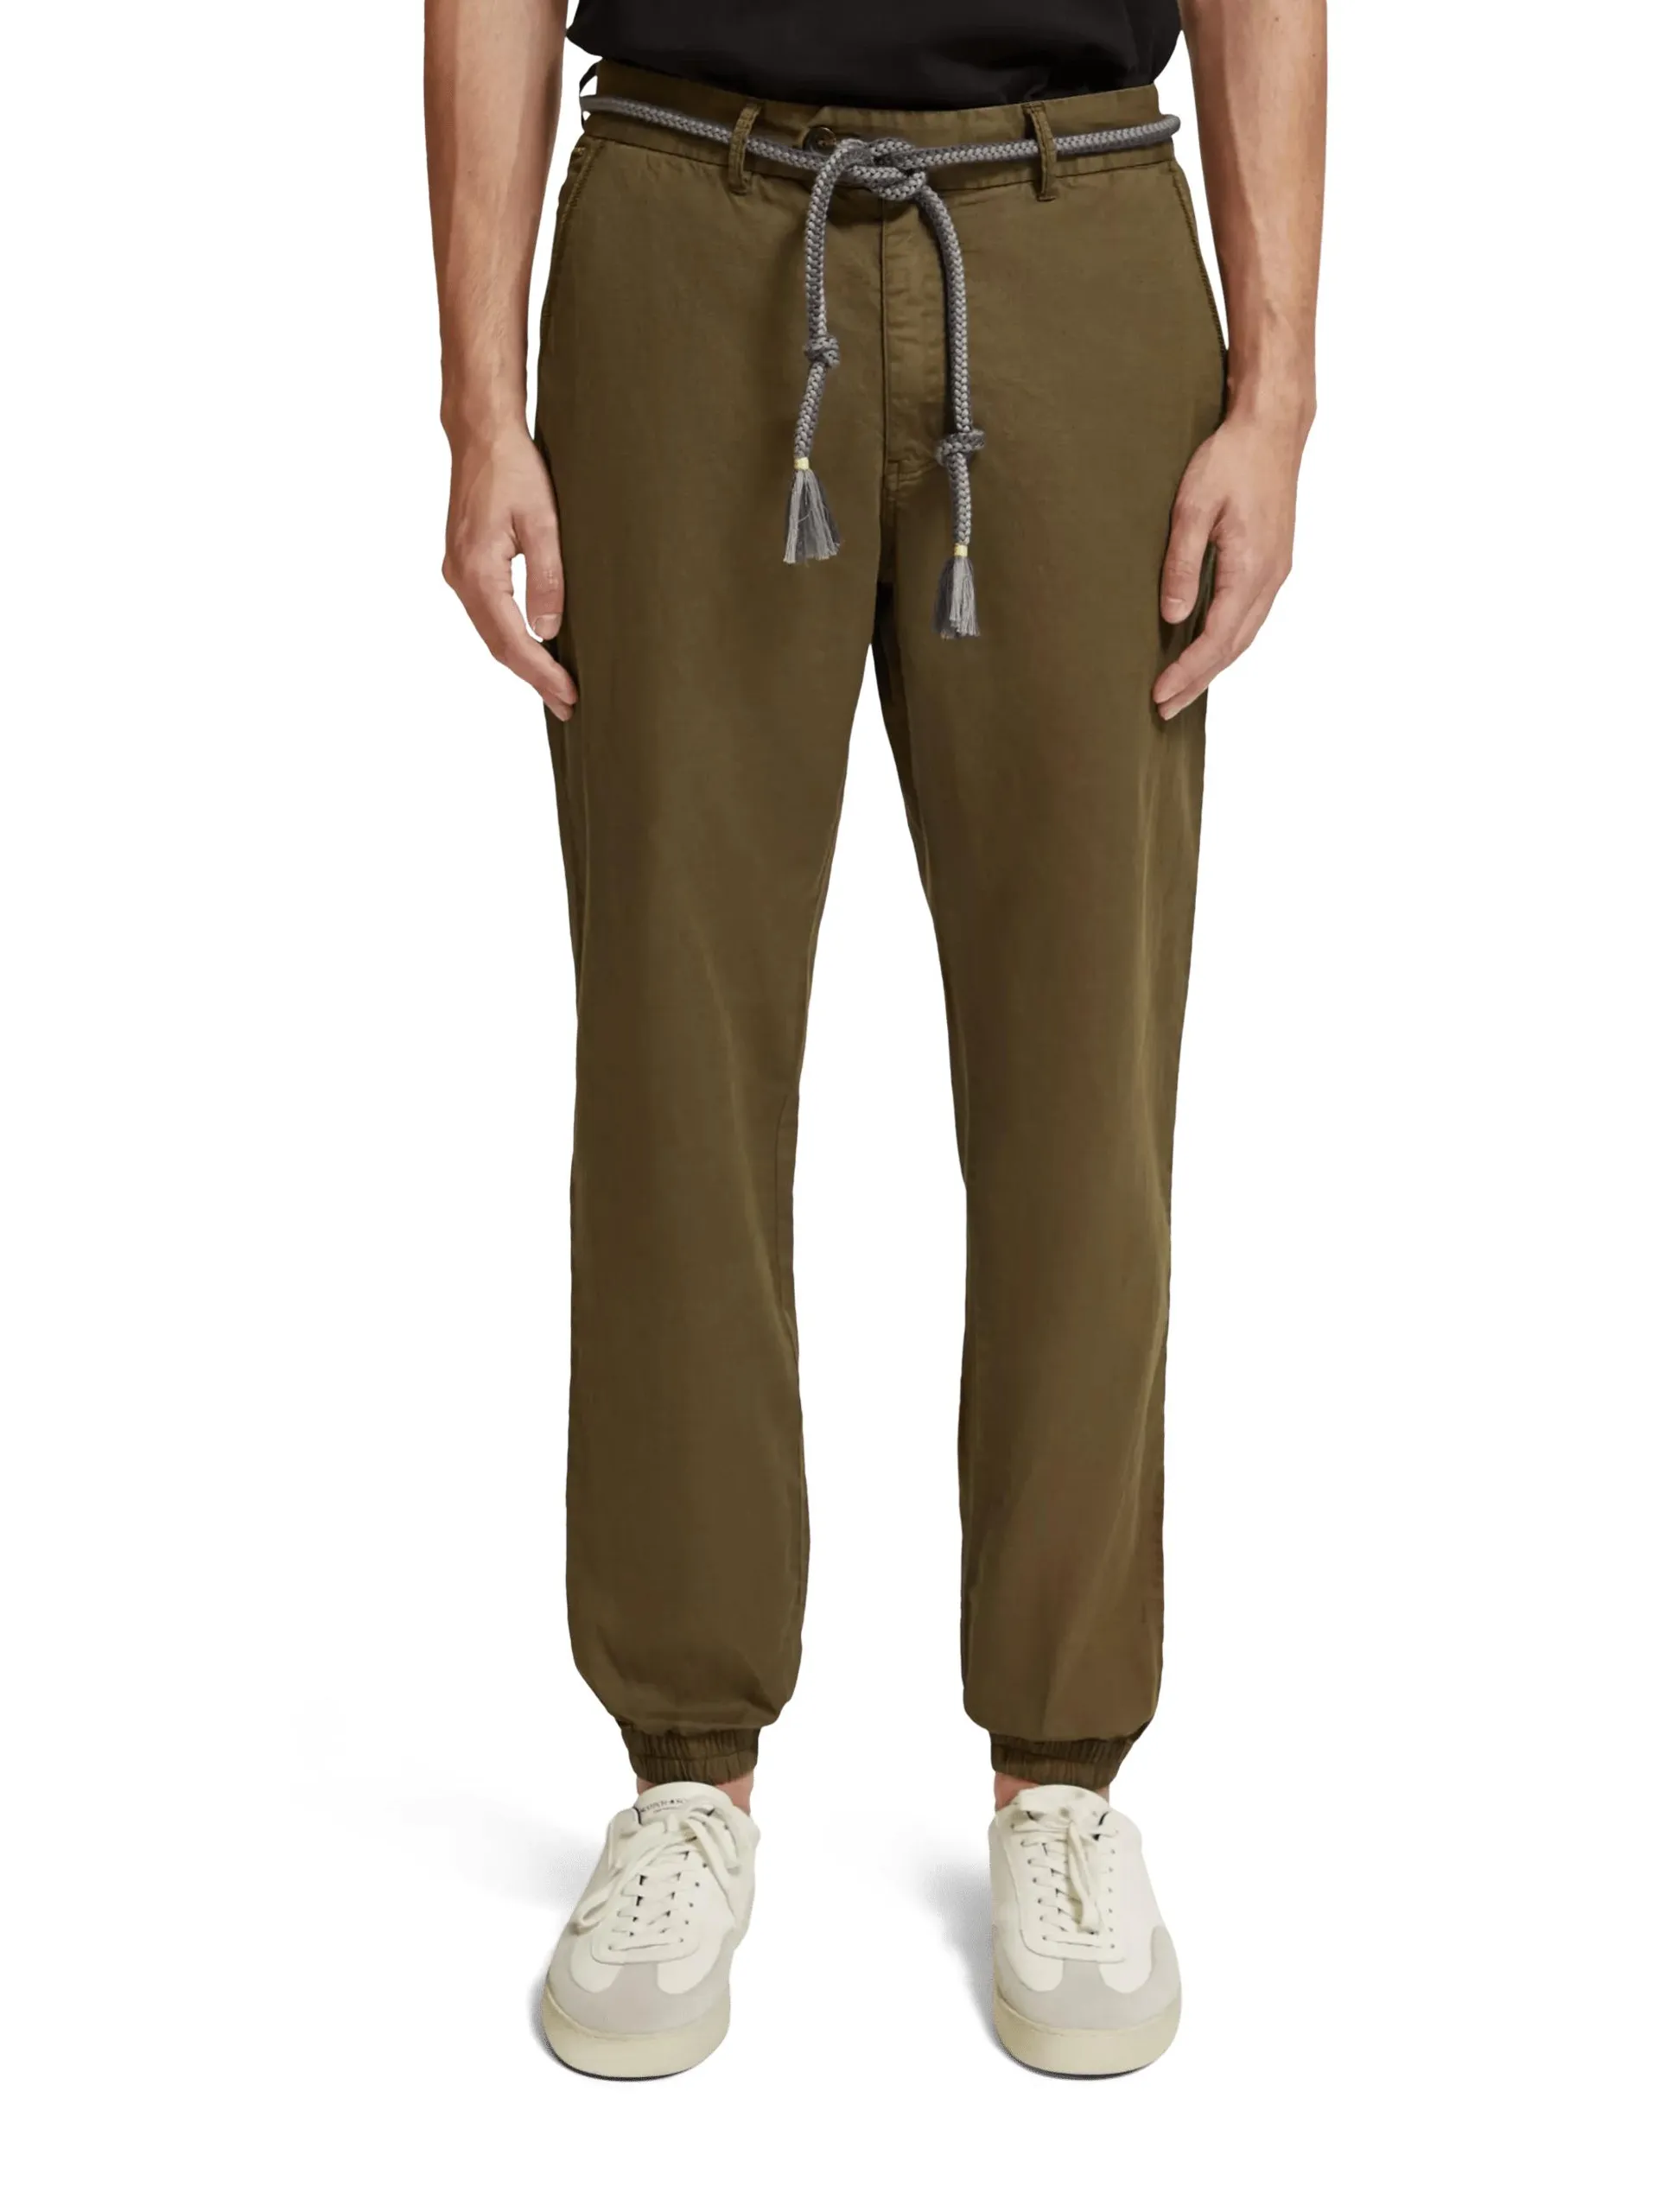 Relaxed linen-blended chino jogger